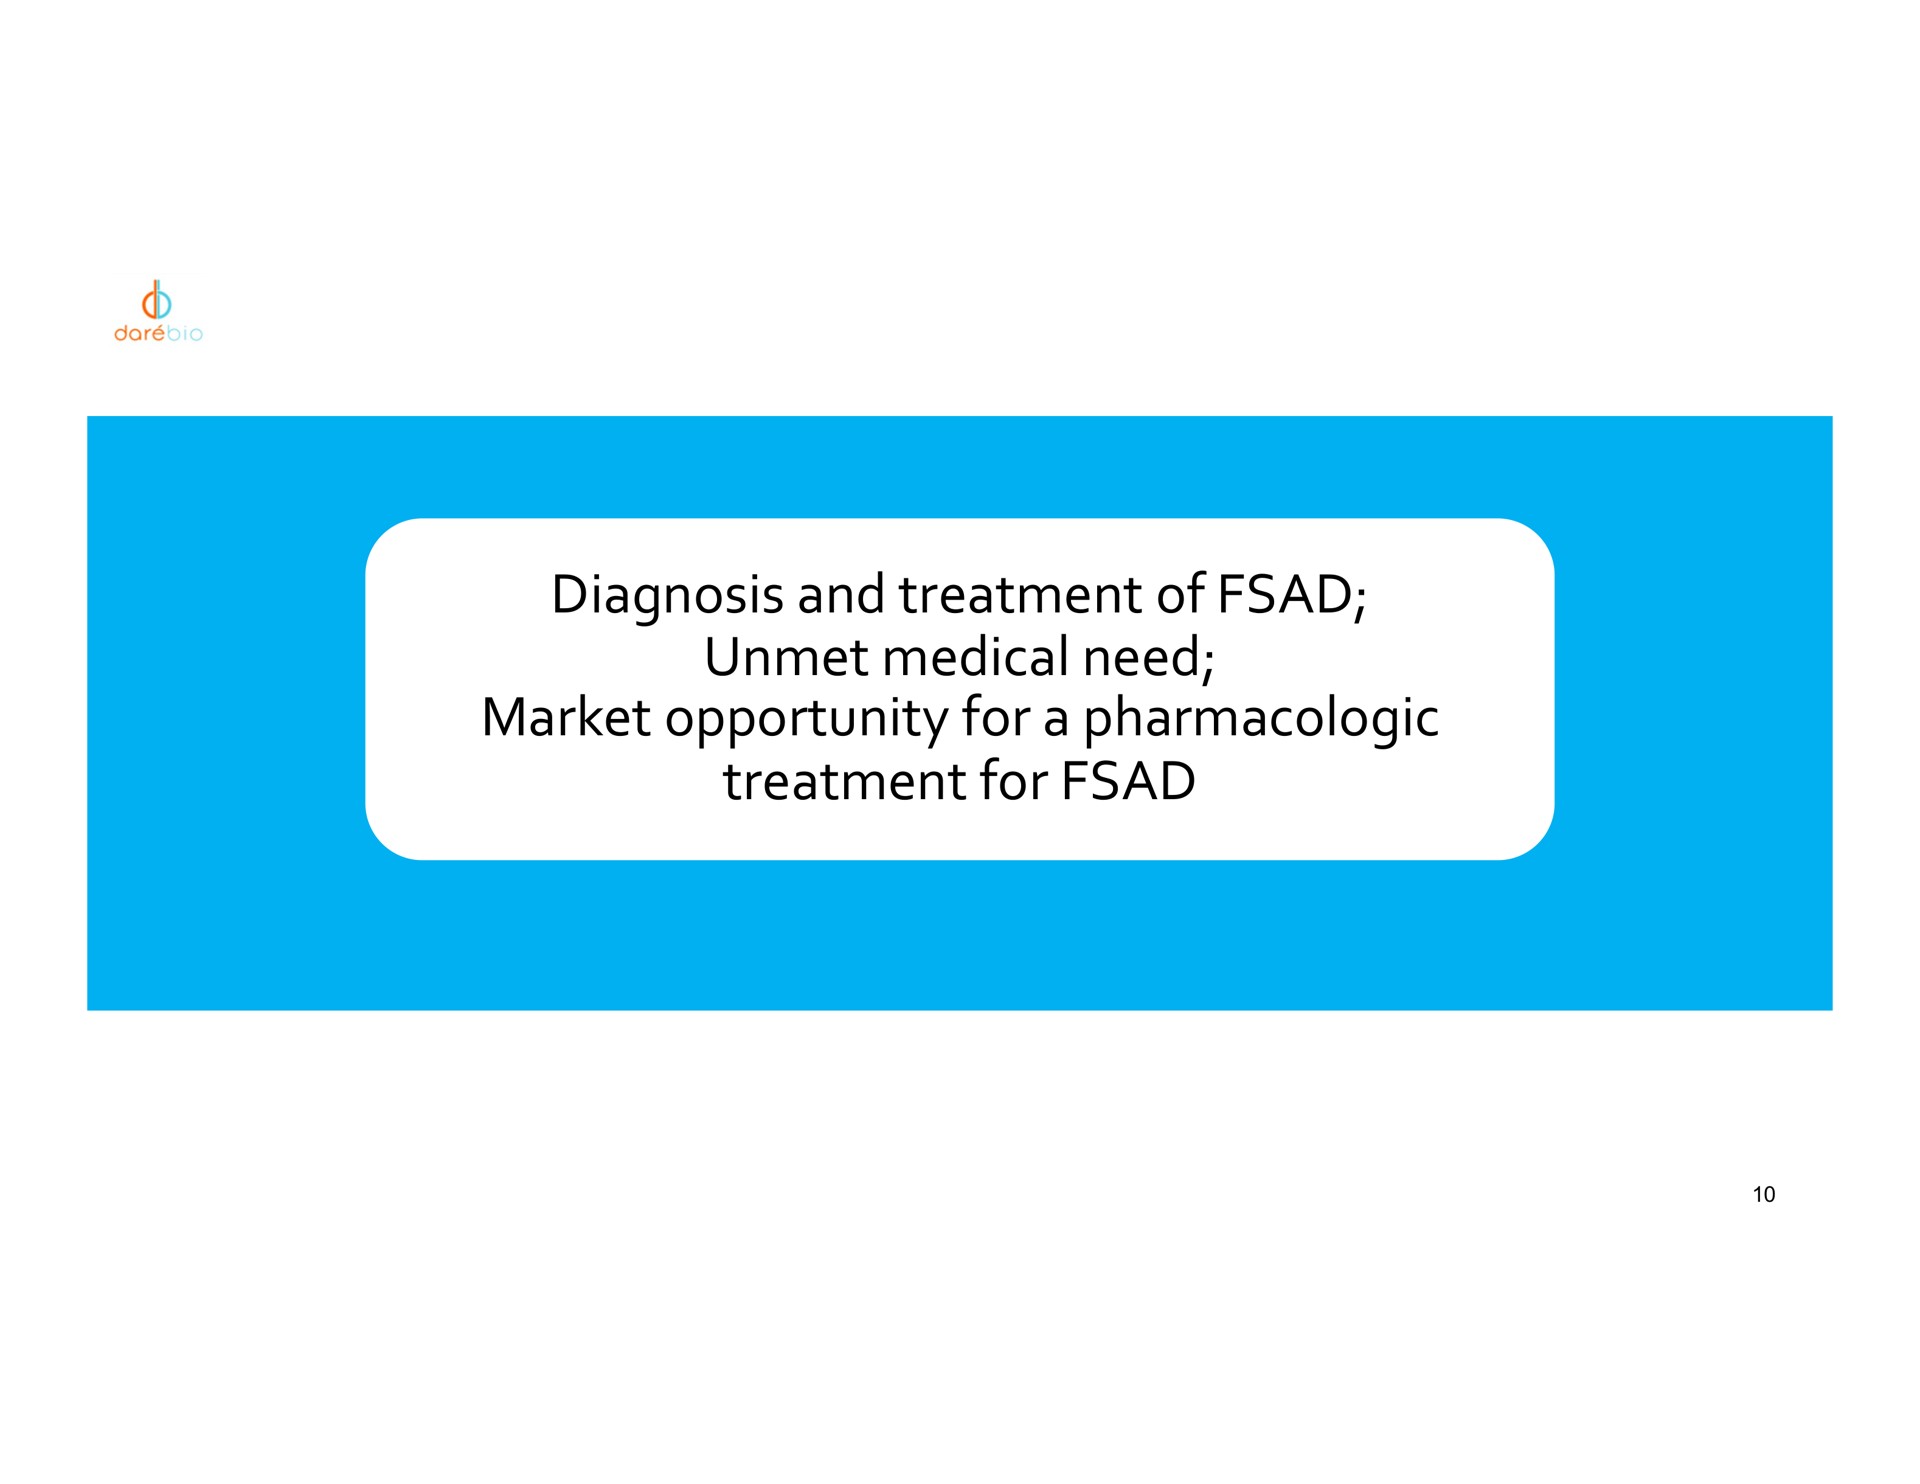 diagnosis and treatment of unmet medical need market opportunity for a pharmacologic treatment for | Dare Bioscience